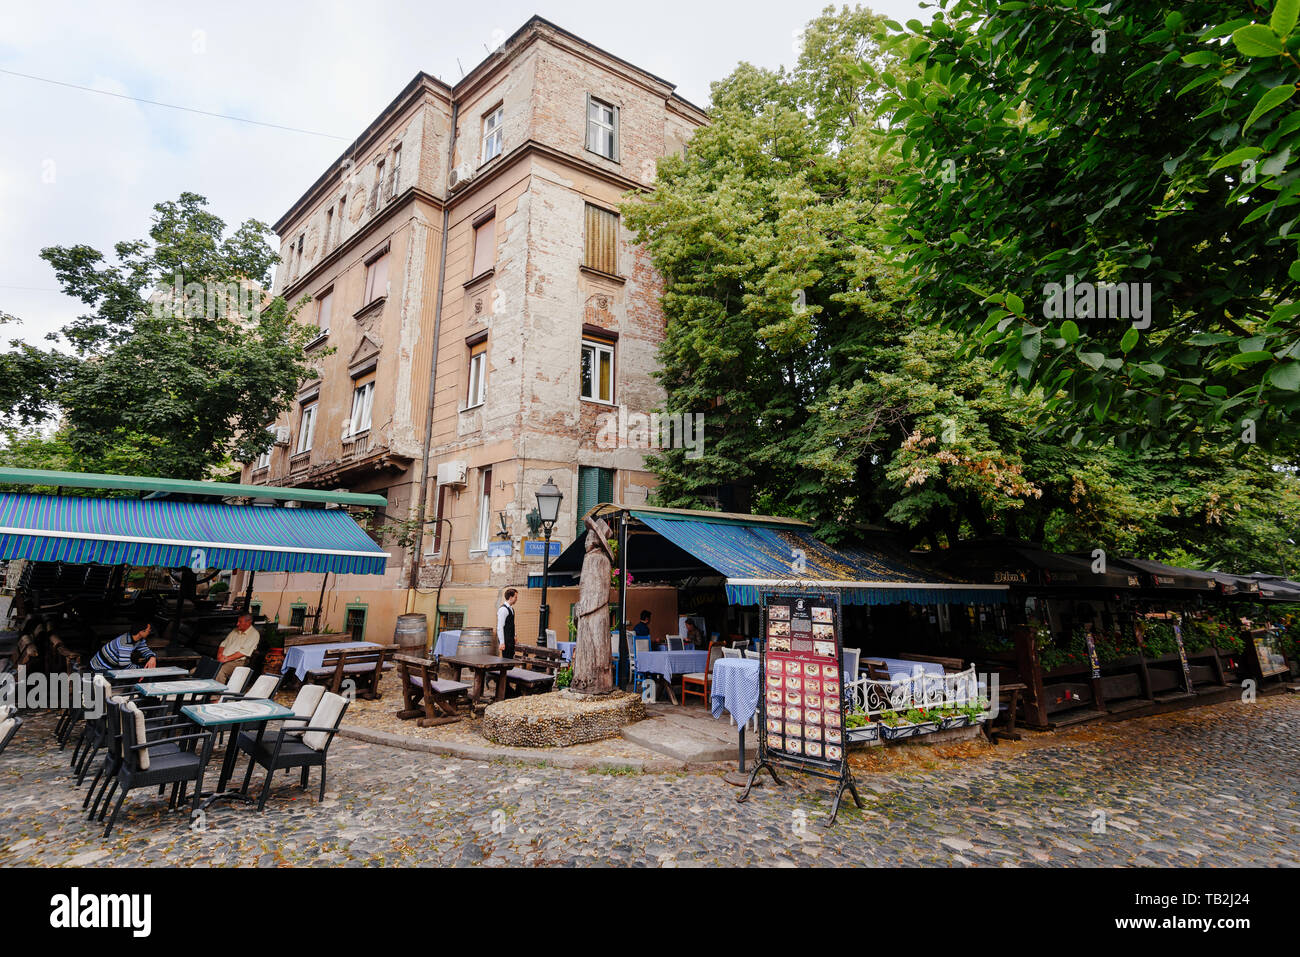 Belgrade, Serbia - June 16, 2018. Historic place Skadarlija with summer cafe terraces, trees, cobbled lanes and alleys in downtown. Bohemian street wi Stock Photo